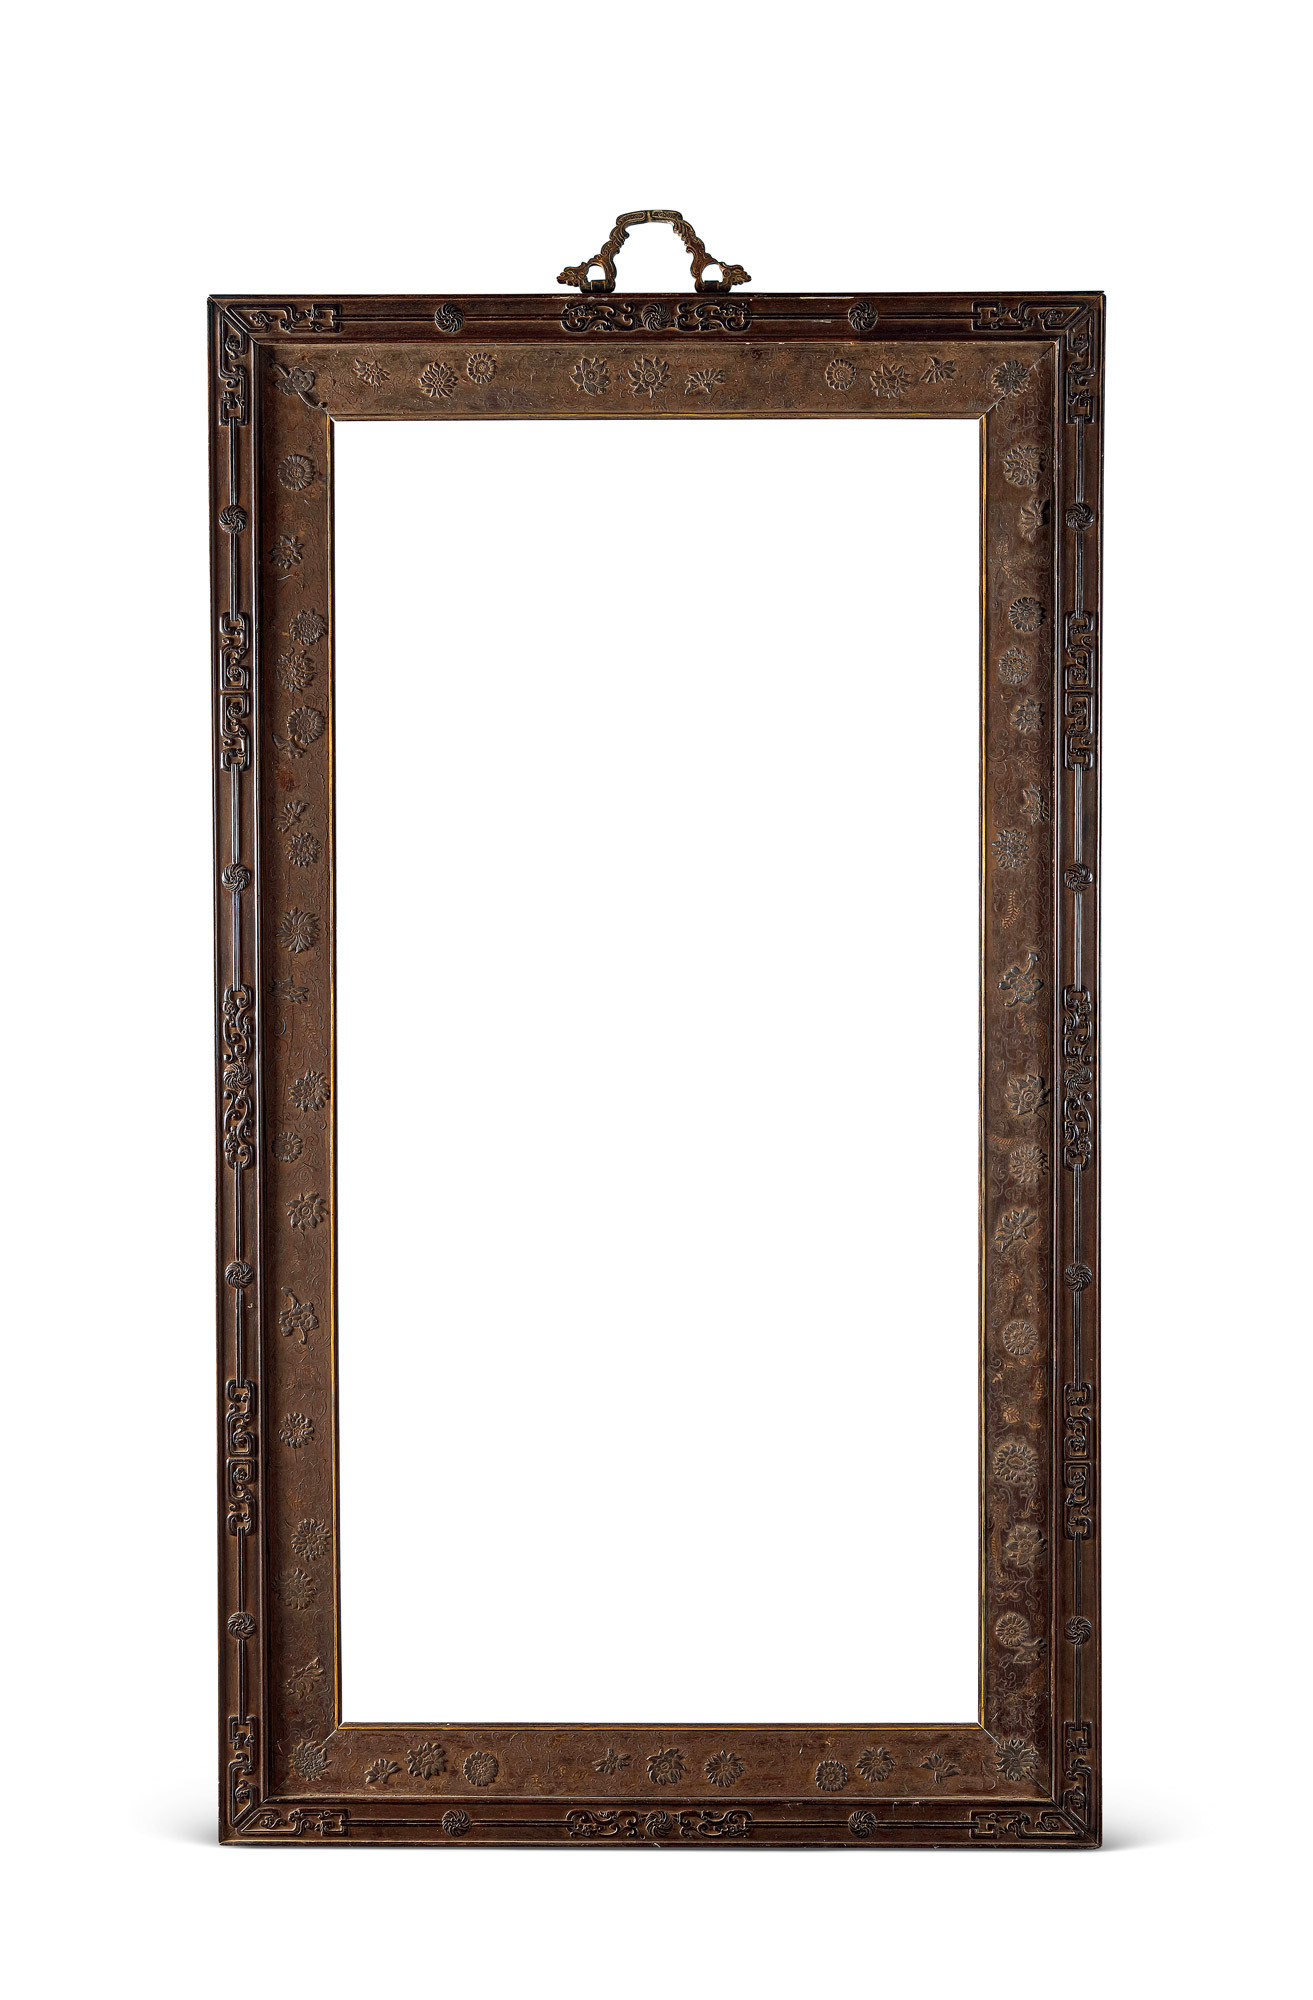 A ZITAN FRAME INLAID WITH GILT AND SILVER